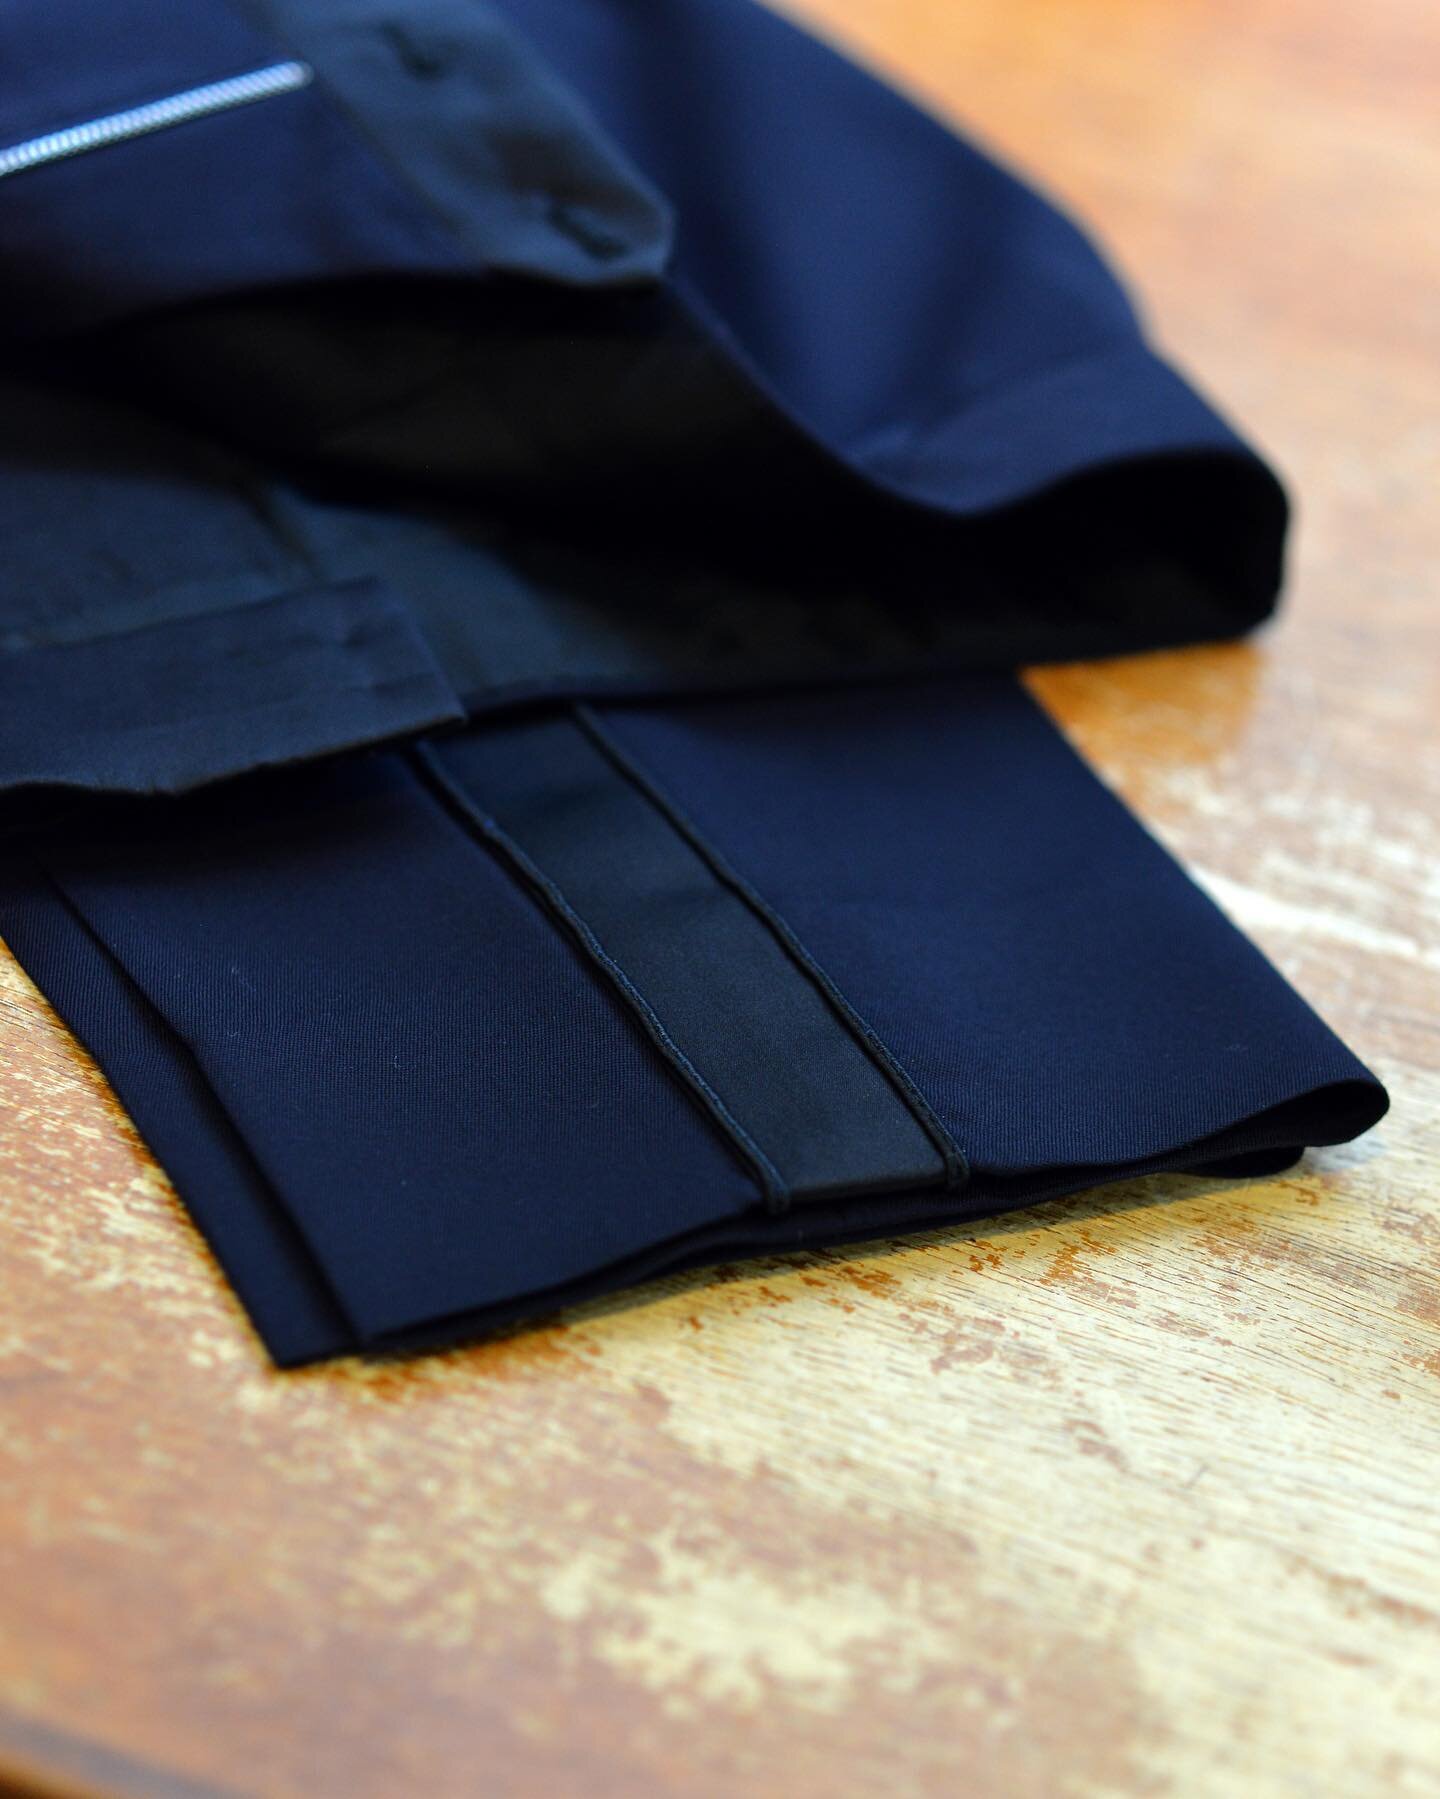 A handmade silk braid on the side of a pair of dress trousers . We make the braid in house by hand, painstakingly rolling silk satin into a strip, then sewing a narrow cord along each edge .